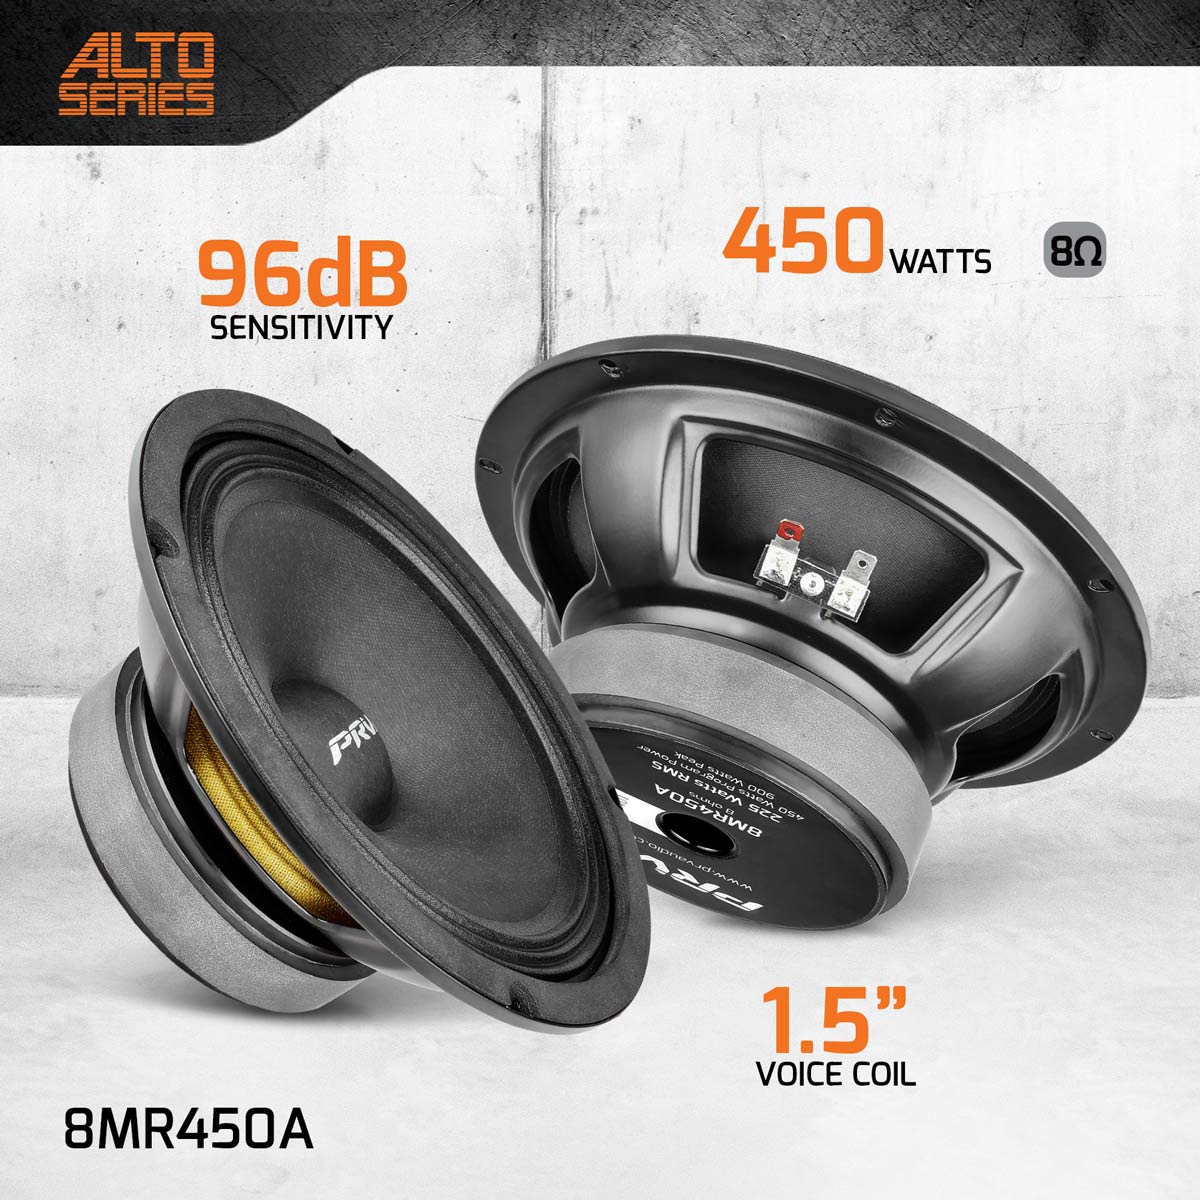 8MR450A - Specs Infographic